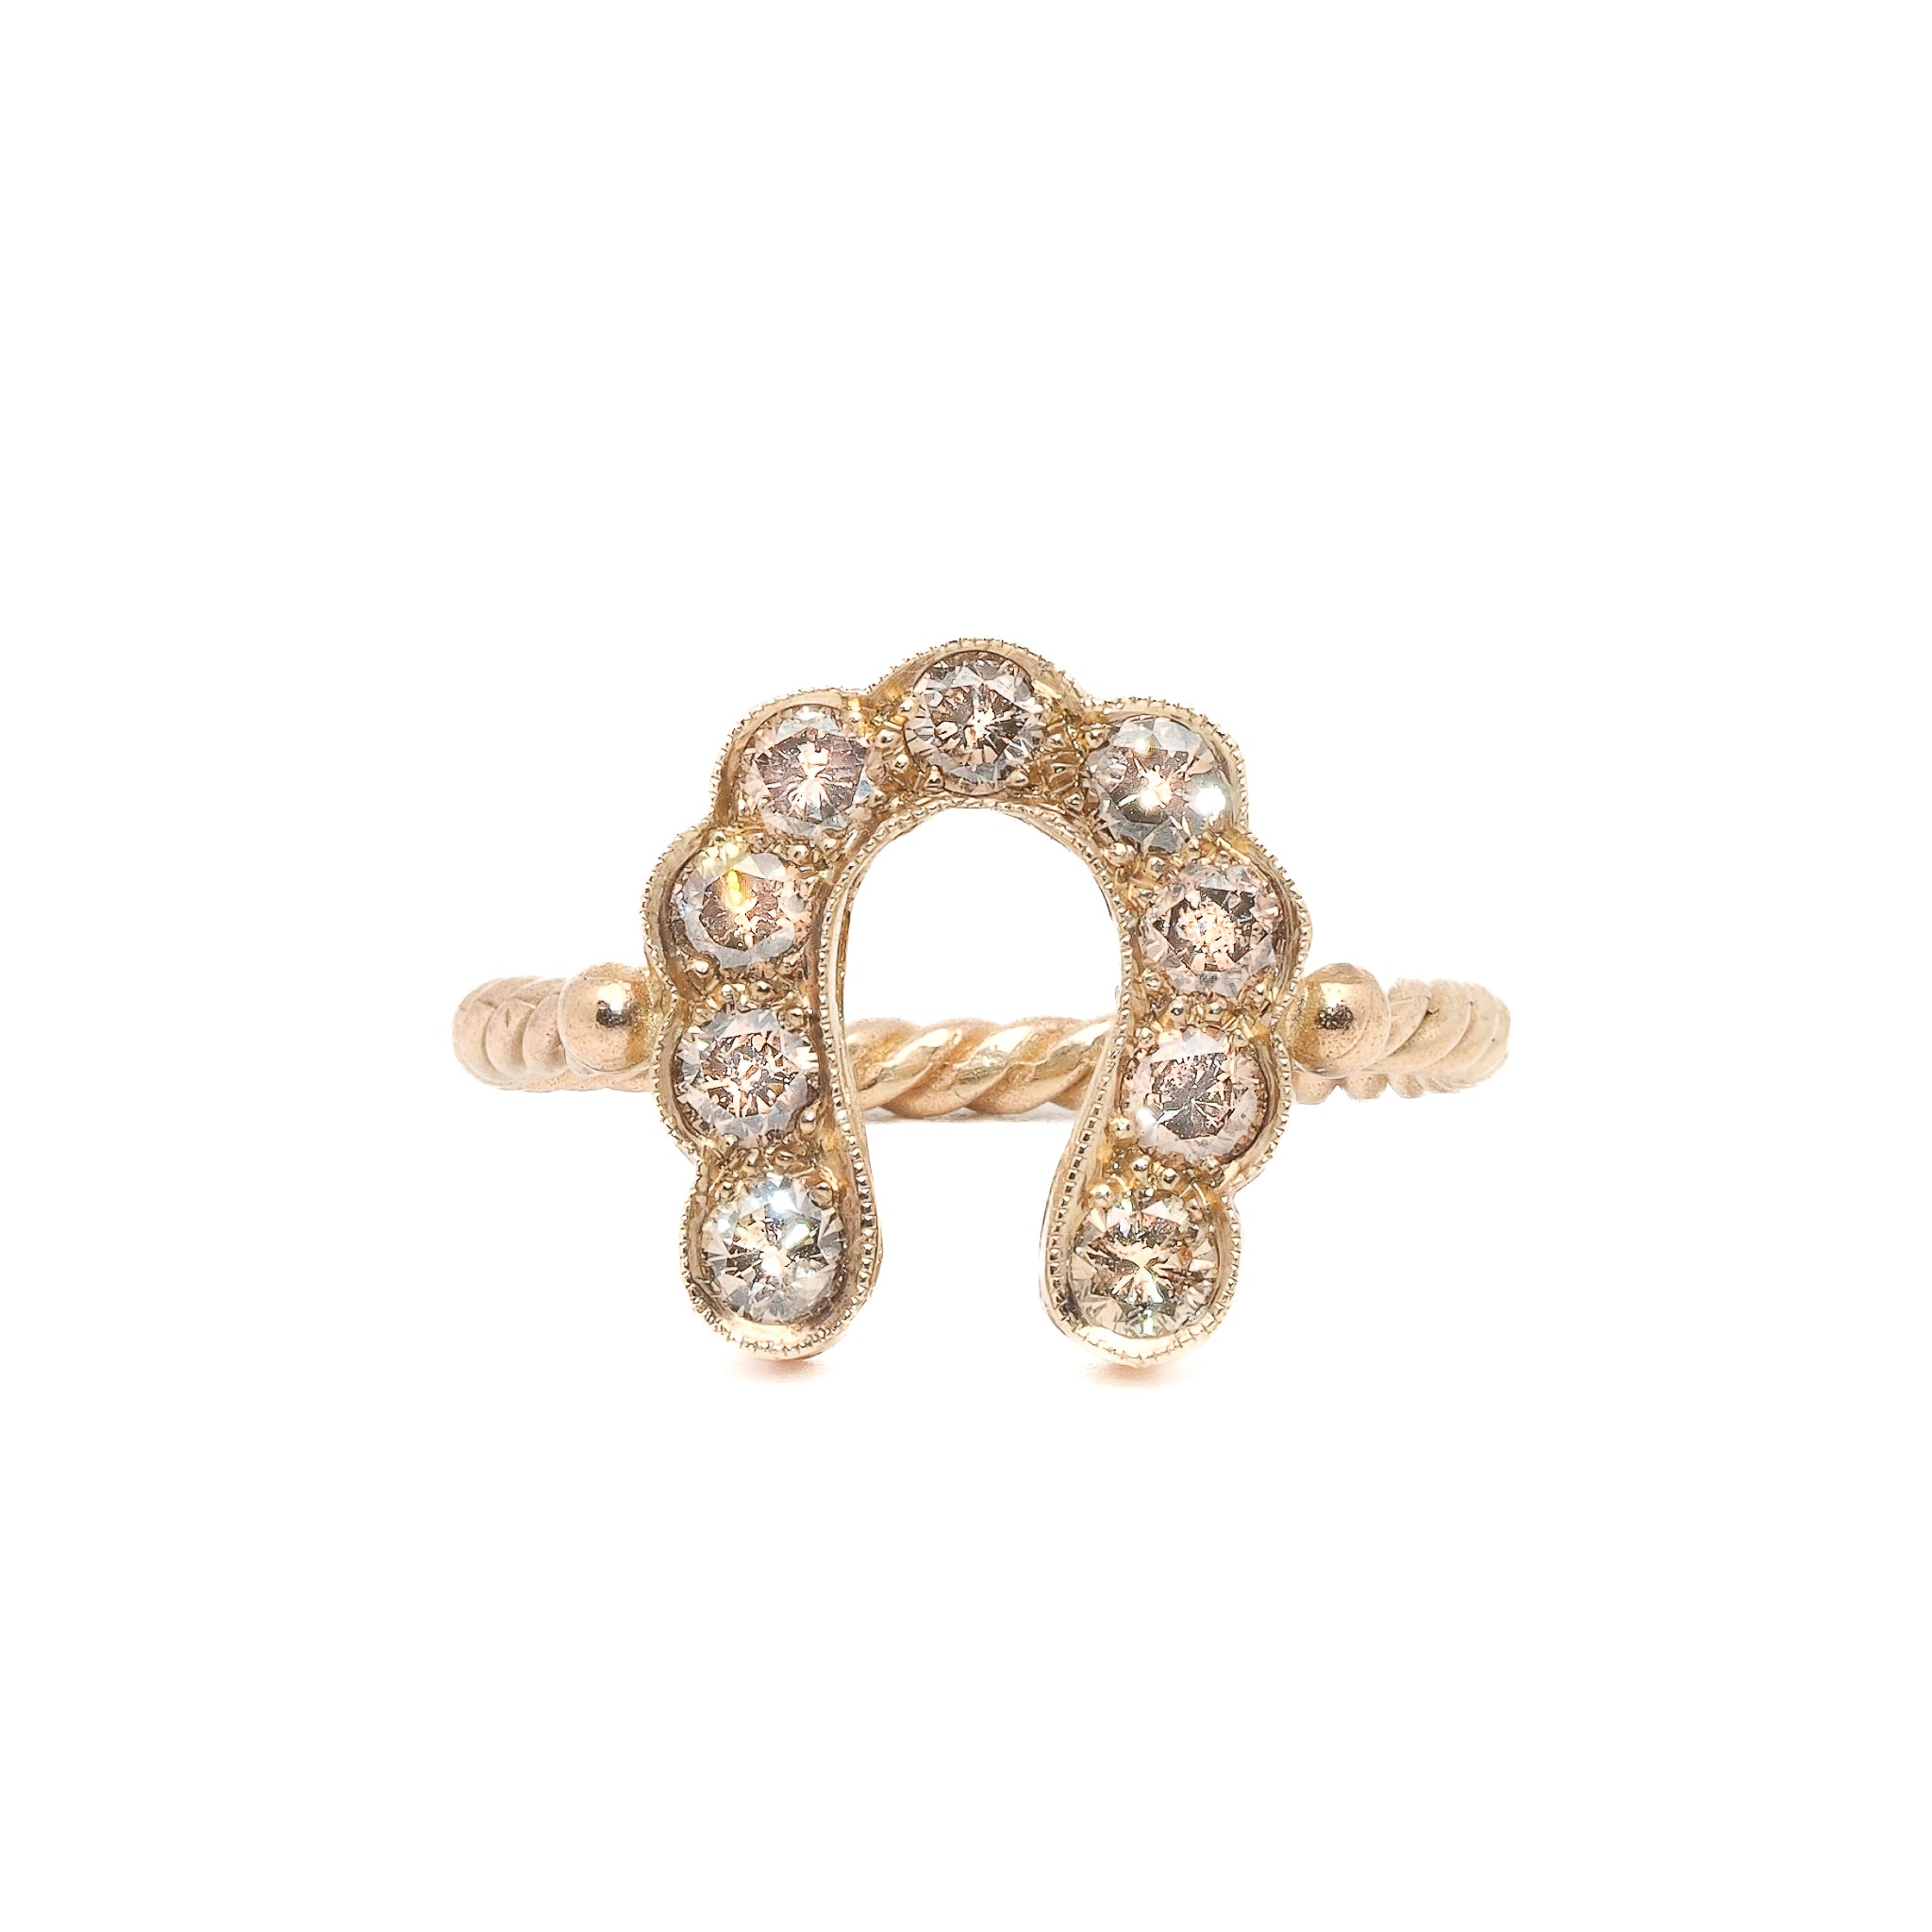 Gold and Diamond Horseshoe Ring - Exquisite handmade ring crafted from high-quality 14k yellow gold, showcasing a horseshoe design embellished with 0.25ct chocolate diamonds.